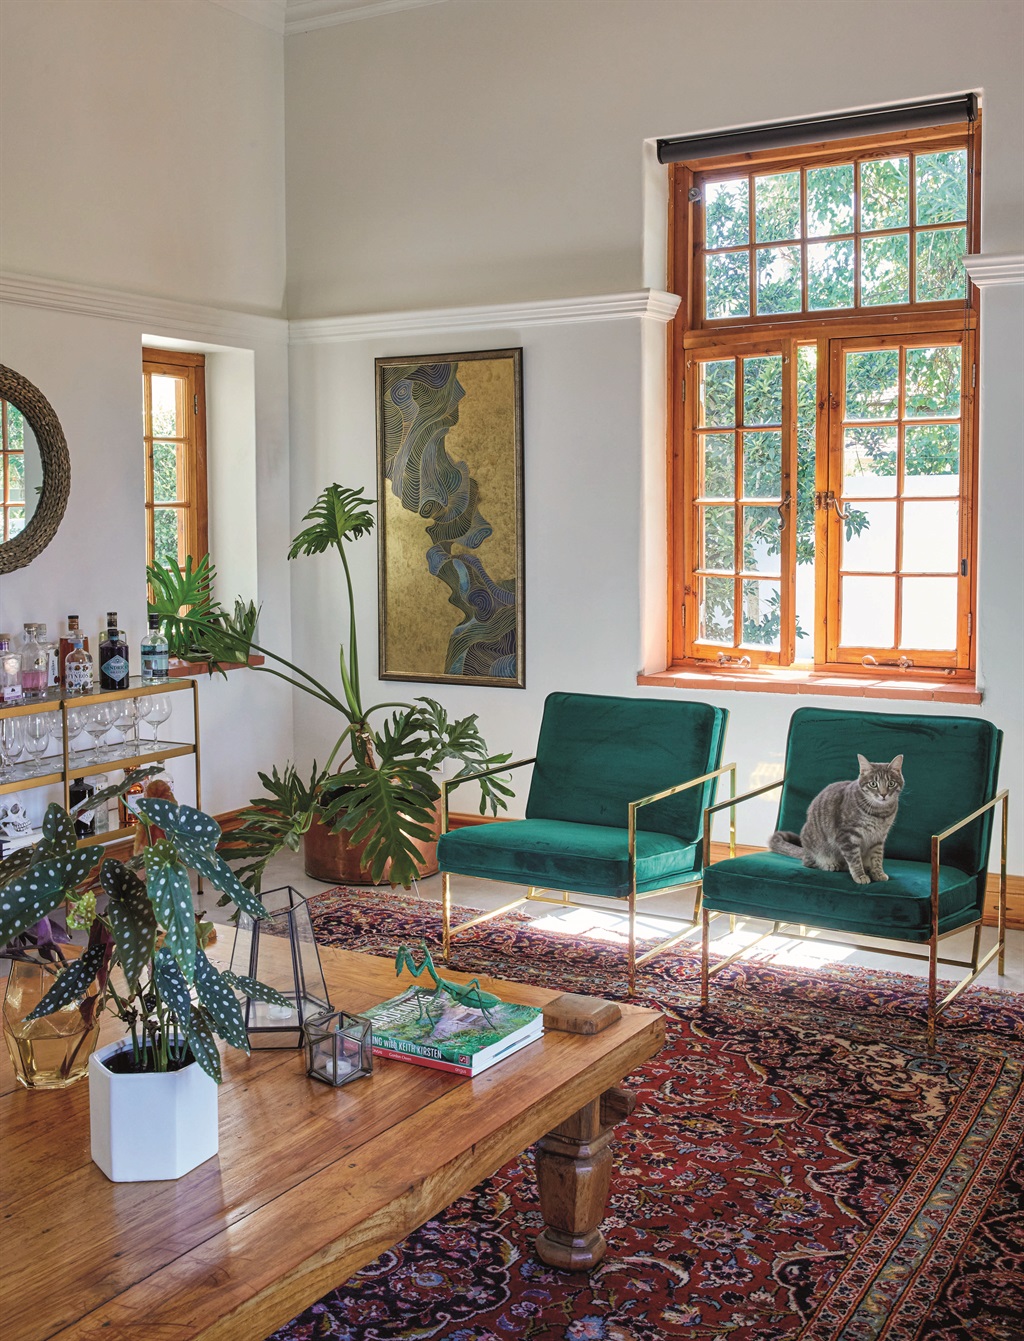 “The copper décor elements were a design decision,” says Willoughby Vergottini. “It’s eclectic yet unique to the home’s architectural era. We wanted to create a balance between old and new, without either dominating. Landscape architect Keith Kirsten put that delicious monster there – he said the space needed a plant.” The Kashan rug was an auction buy and the coffee table belonged to Willoughby’s parents. The painting is Willoughby’s handiwork. Chairs and drinks trolley from @home